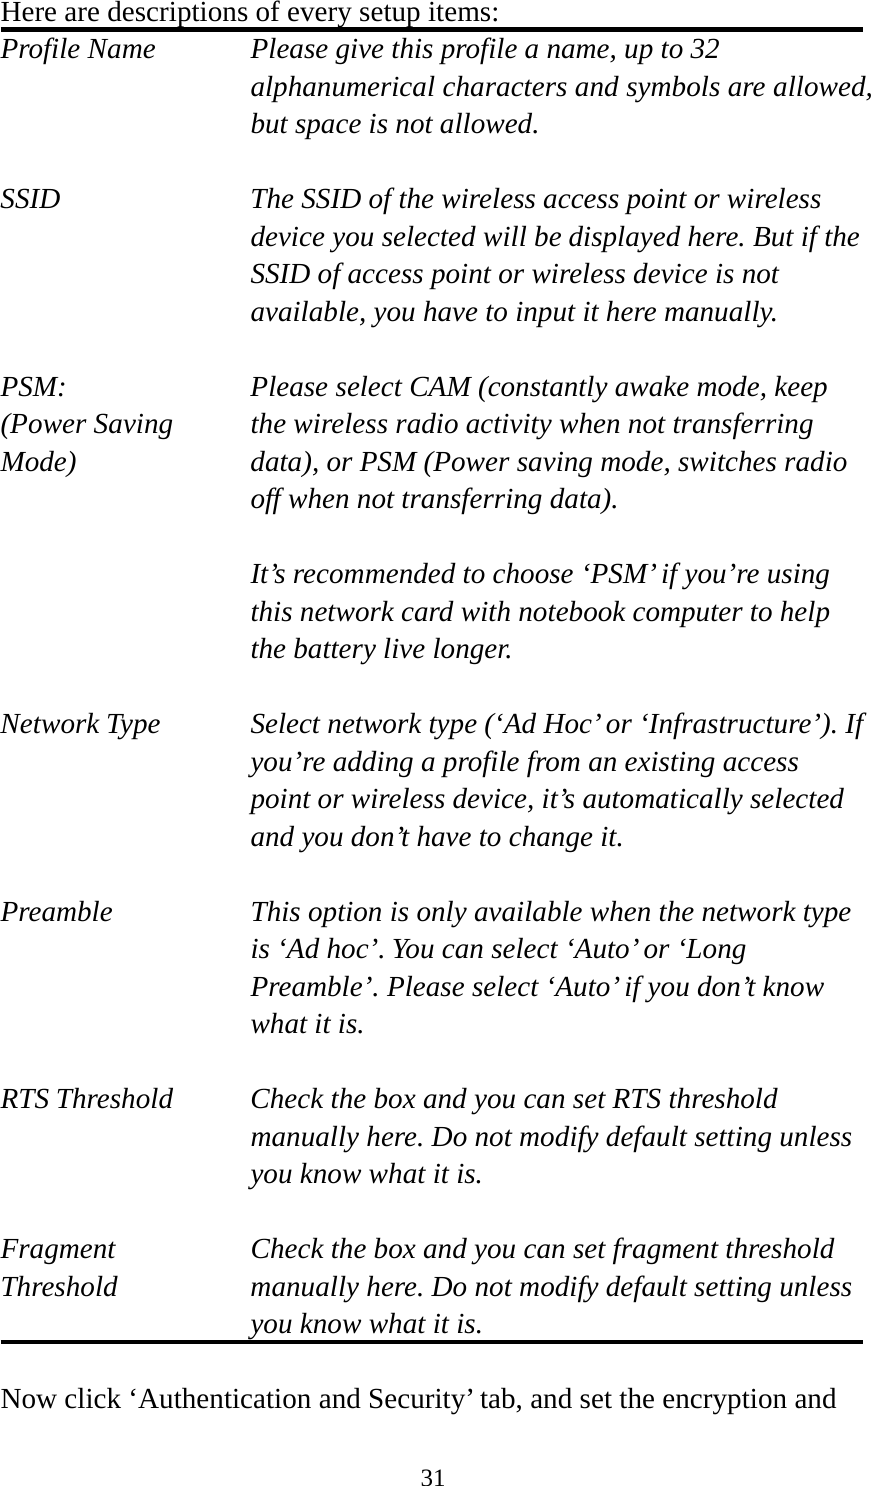  31Here are descriptions of every setup items: Profile Name      Please give this profile a name, up to 32   alphanumerical characters and symbols are allowed, but space is not allowed.    SSID    The SSID of the wireless access point or wireless device you selected will be displayed here. But if the SSID of access point or wireless device is not available, you have to input it here manually.  PSM:    Please select CAM (constantly awake mode, keep   (Power Saving    the wireless radio activity when not transferring Mode)  data), or PSM (Power saving mode, switches radio off when not transferring data).  It’s recommended to choose ‘PSM’ if you’re using this network card with notebook computer to help the battery live longer.  Network Type    Select network type (‘Ad Hoc’ or ‘Infrastructure’). If you’re adding a profile from an existing access point or wireless device, it’s automatically selected and you don’t have to change it.  Preamble    This option is only available when the network type is ‘Ad hoc’. You can select ‘Auto’ or ‘Long Preamble’. Please select ‘Auto’ if you don’t know what it is.  RTS Threshold    Check the box and you can set RTS threshold manually here. Do not modify default setting unless you know what it is.  Fragment    Check the box and you can set fragment threshold Threshold  manually here. Do not modify default setting unless you know what it is.  Now click ‘Authentication and Security’ tab, and set the encryption and 